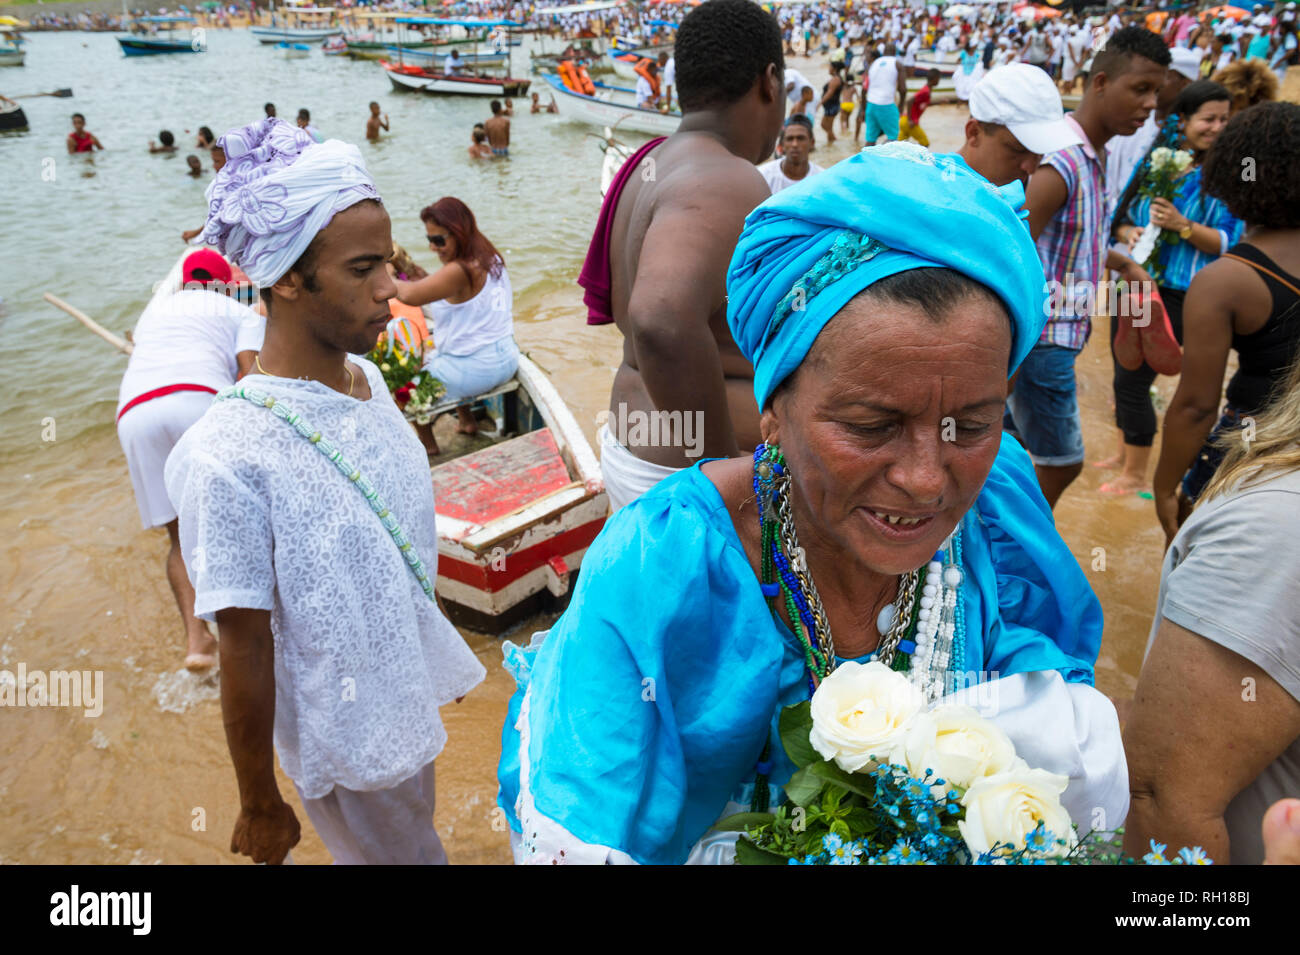 SALVADOR, BRAZIL - FEBRUARY 2, 2016: Celebrants at the Festival of Yemanja carry flowers on Rio Vermelho beach to leave as an offering at sea. Stock Photo